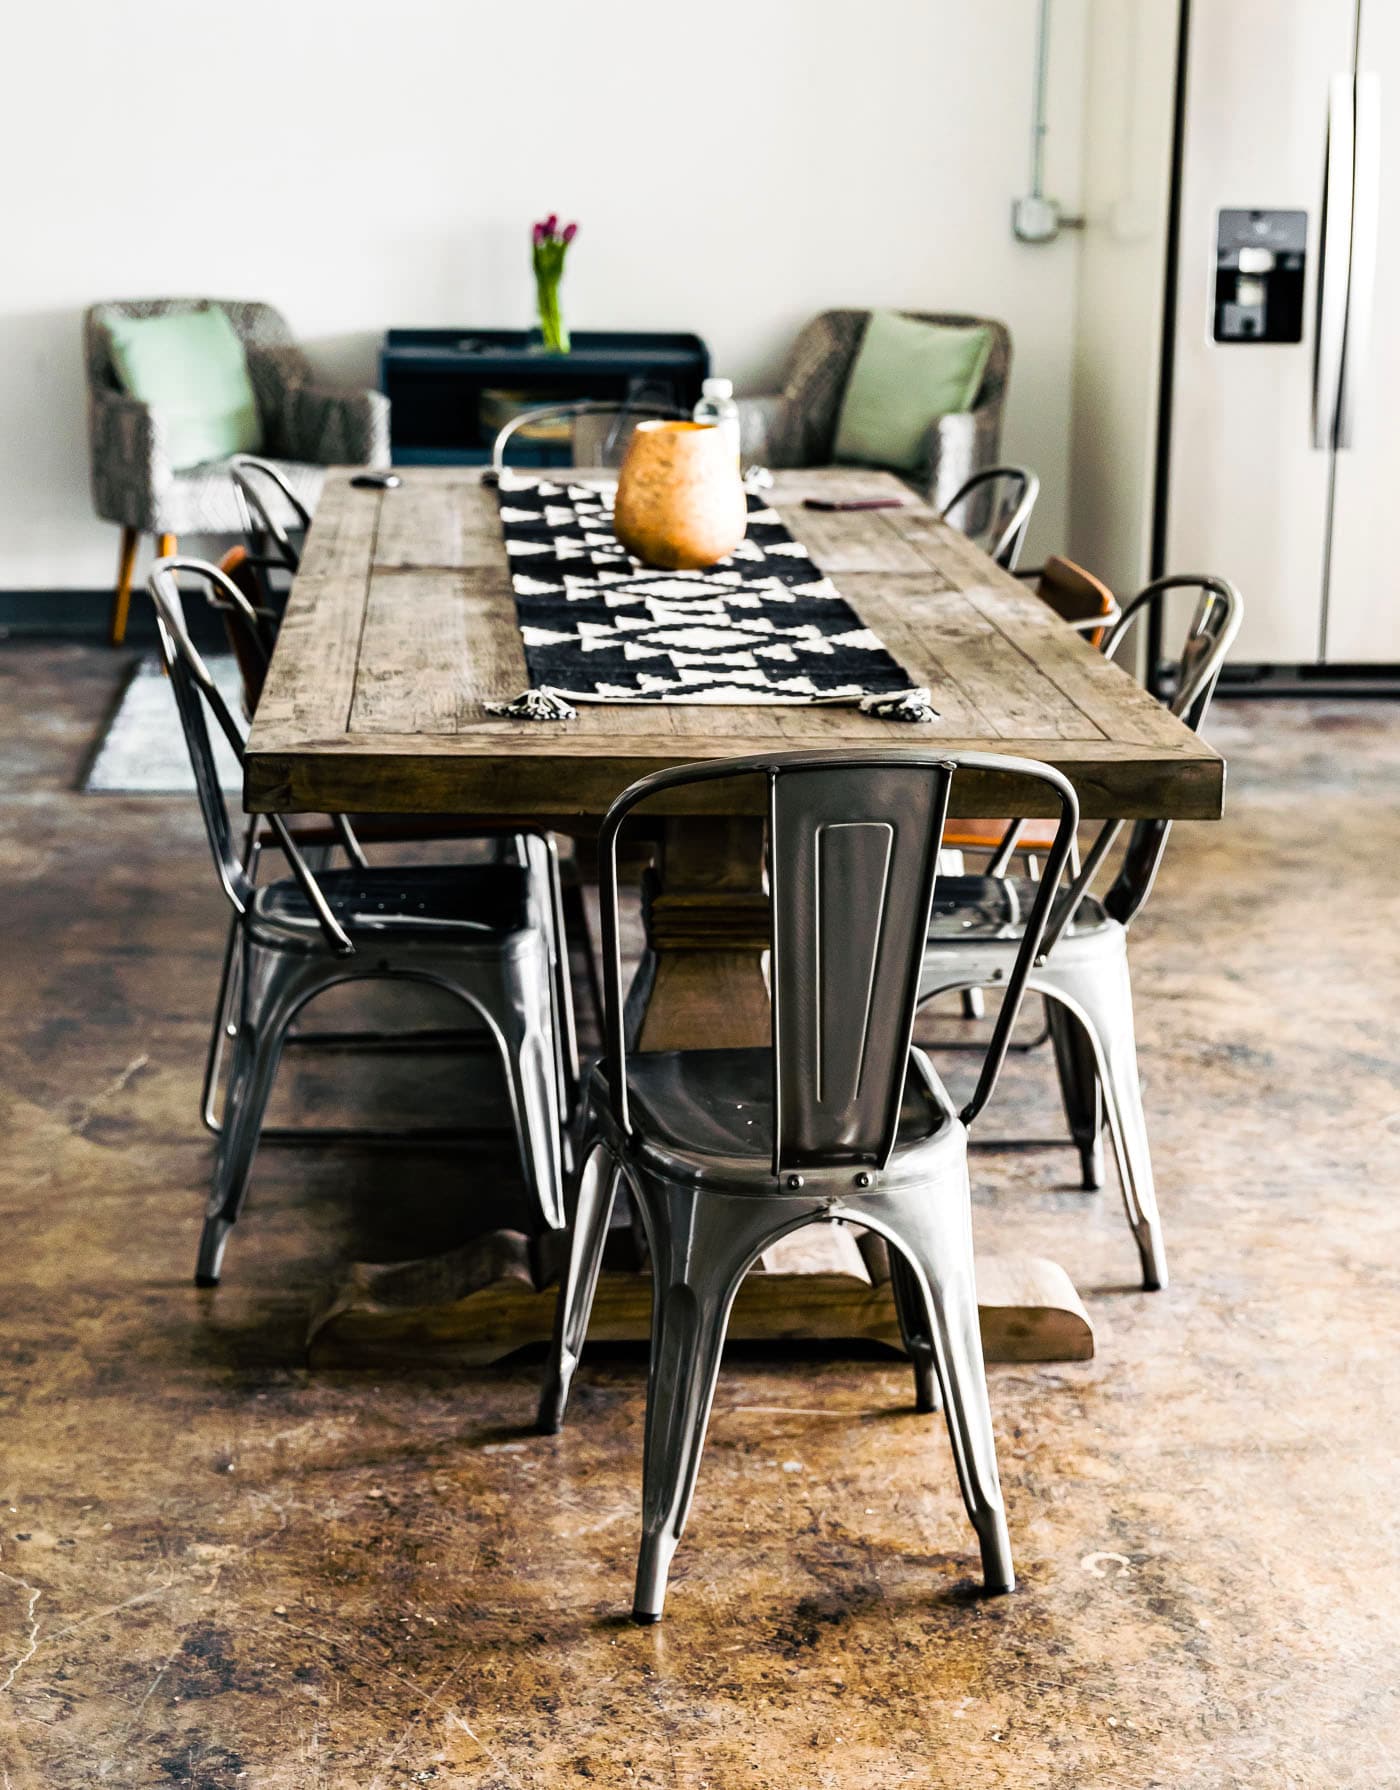 Long wooden table with metal chairs, table runner in black and white.